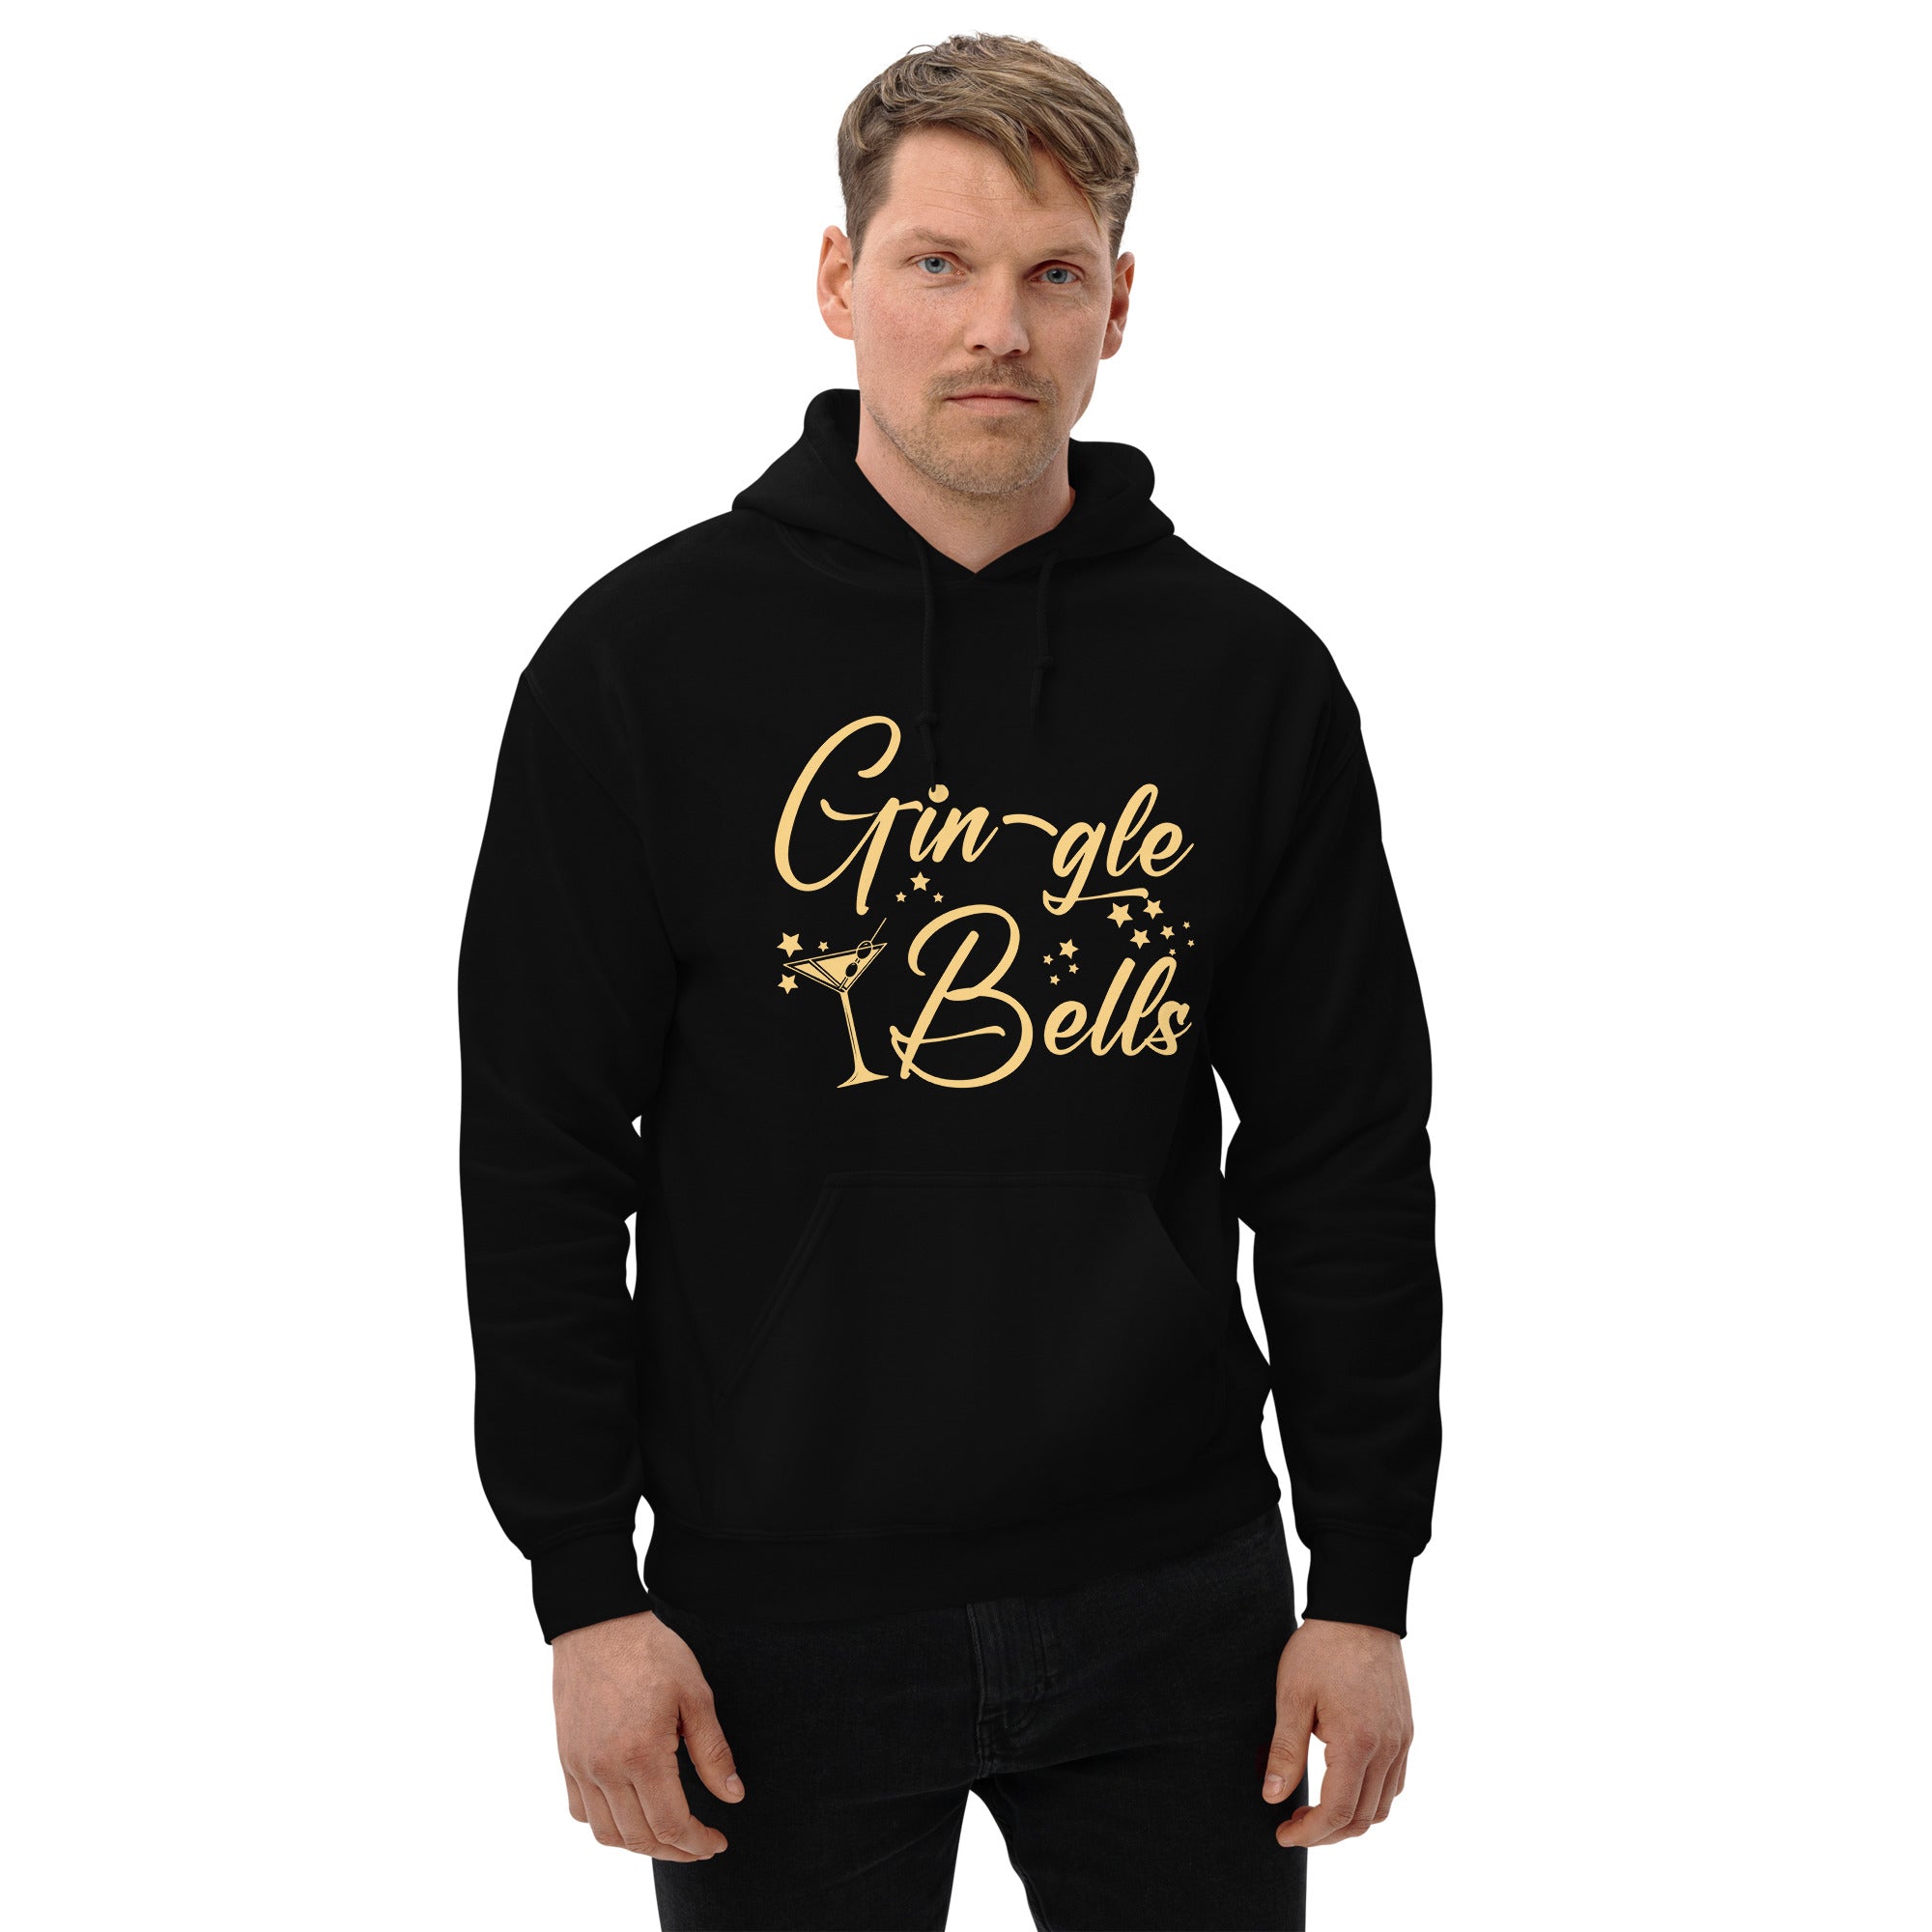 Gin-gle Bells Christmas Gin Tonic Alcohol Christmas Cocktail Xmas Gin Lover Men's Hoodie